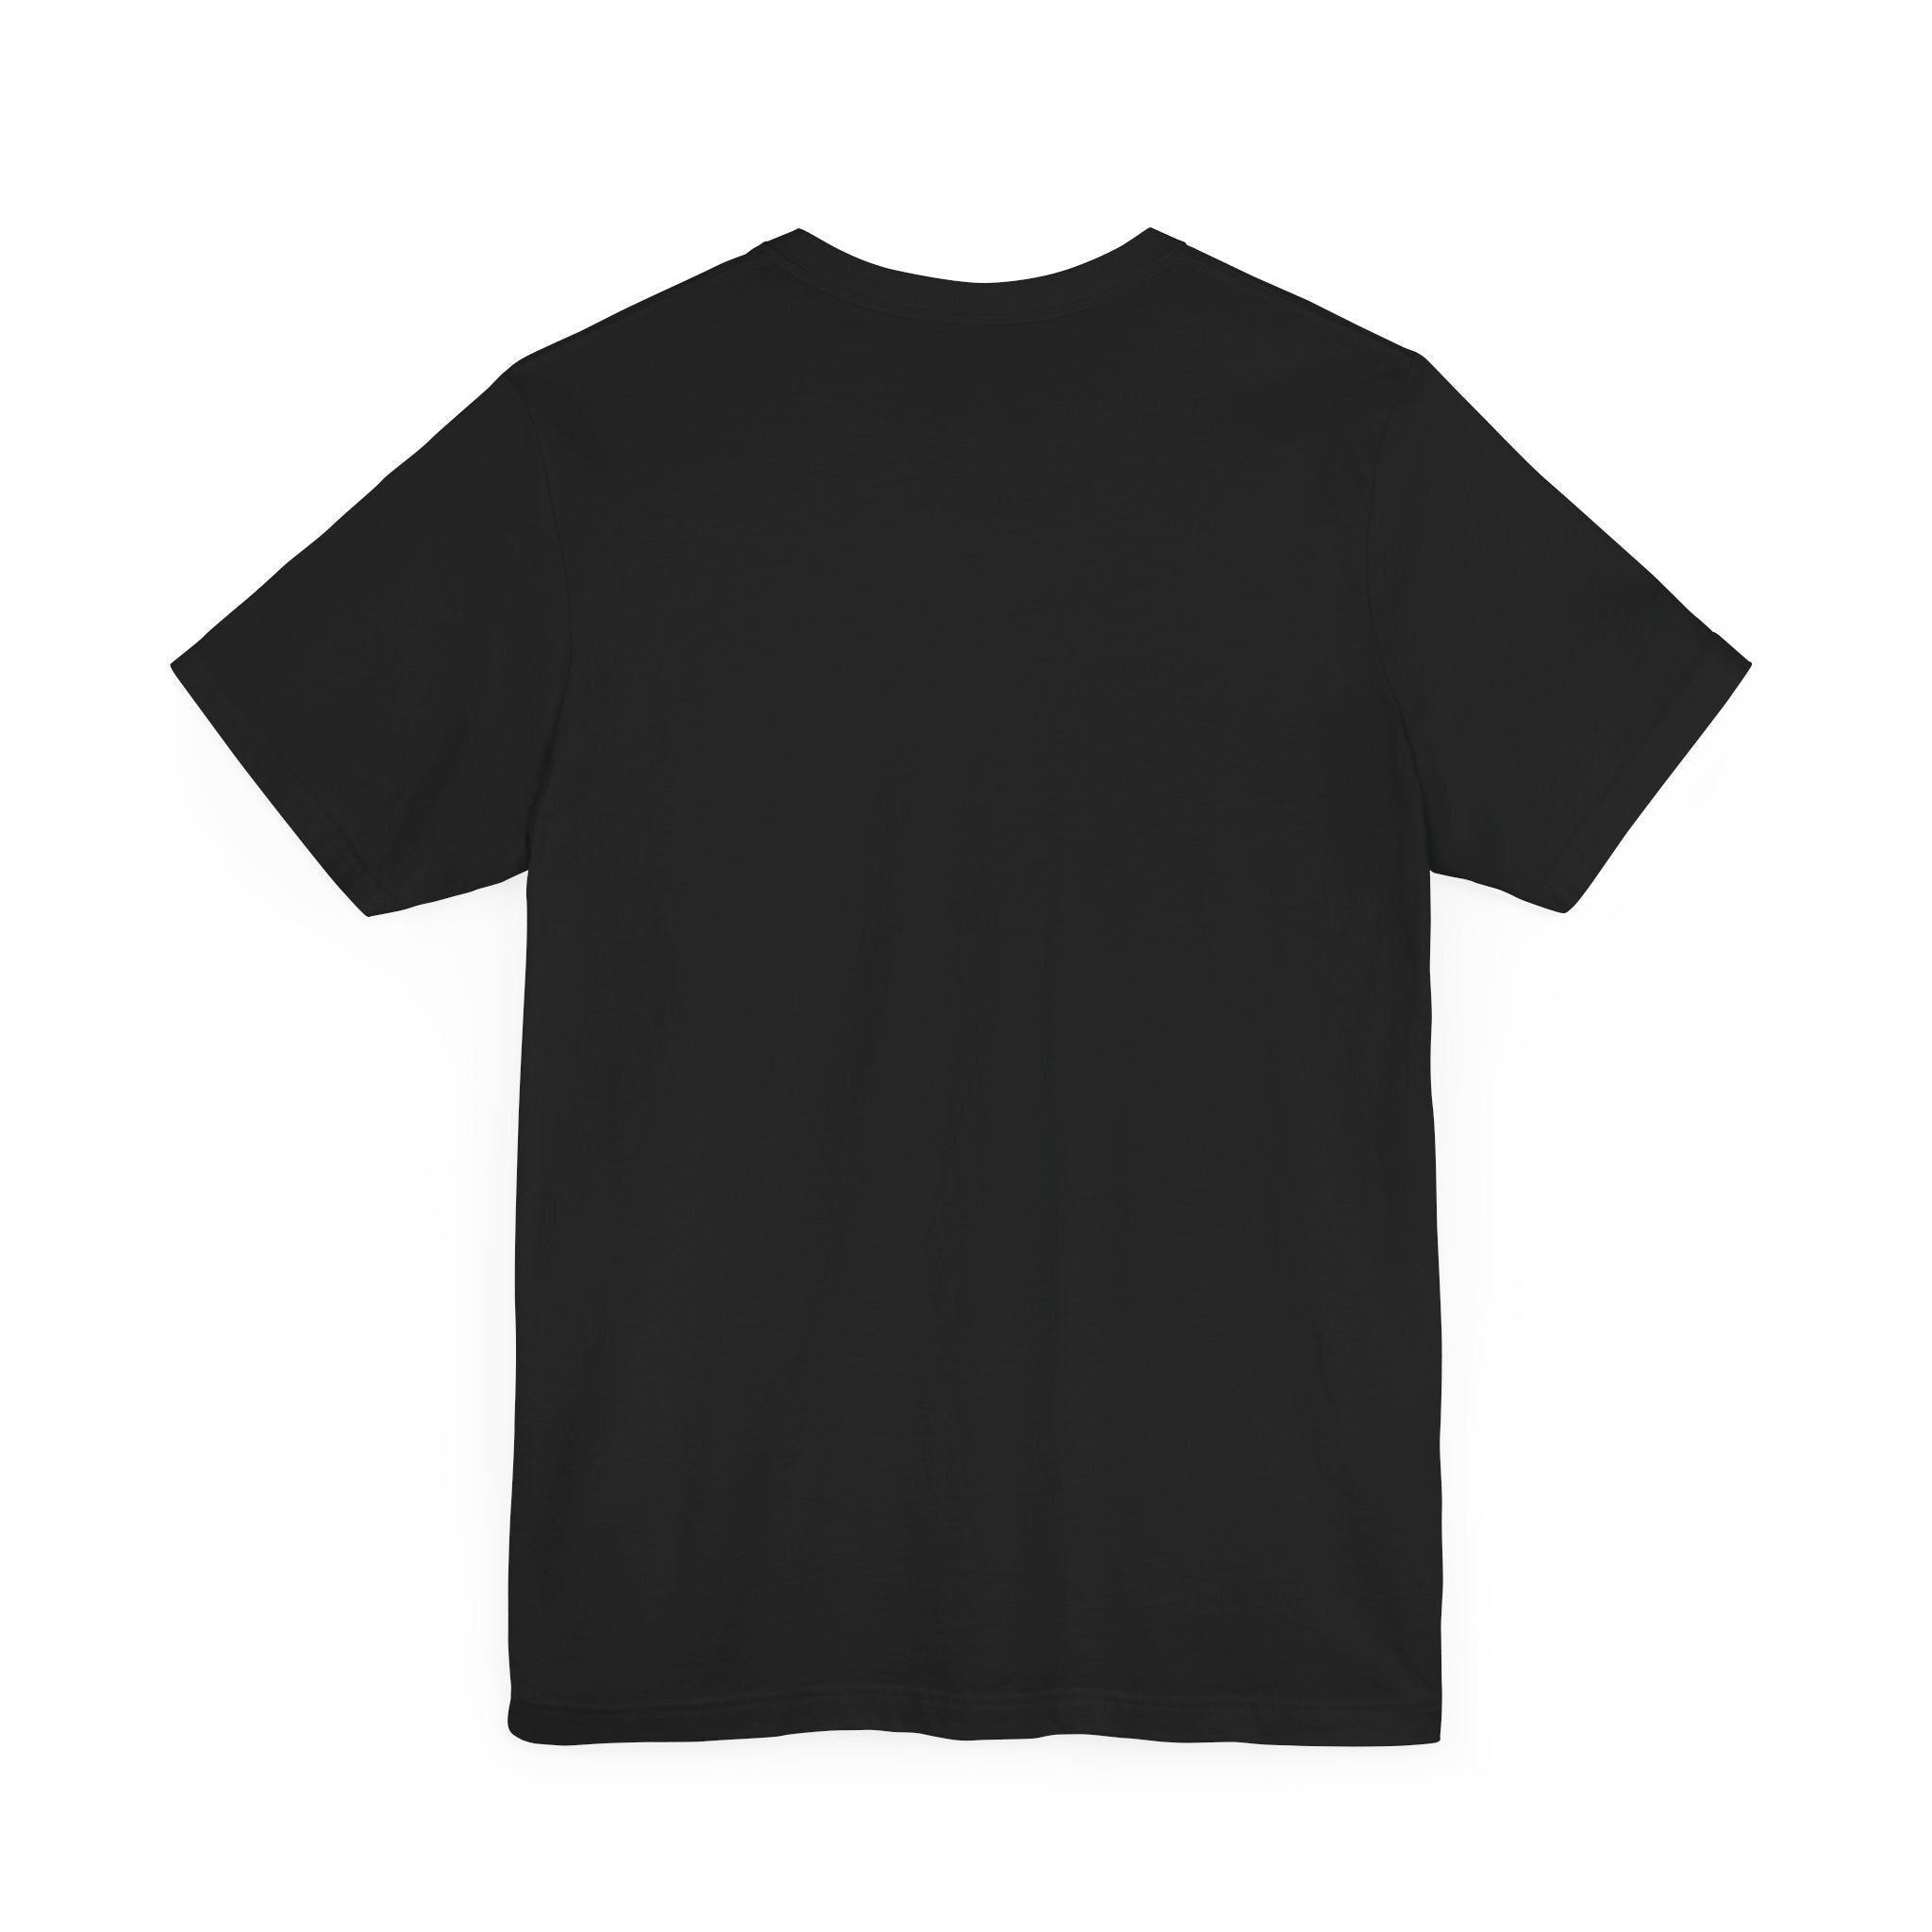 A plain black short-sleeve C-Ho-Co-La-Te - T-Shirt, crafted from 100% Airlume cotton, shown from the back. An essential piece that elevates any fashion wardrobe.